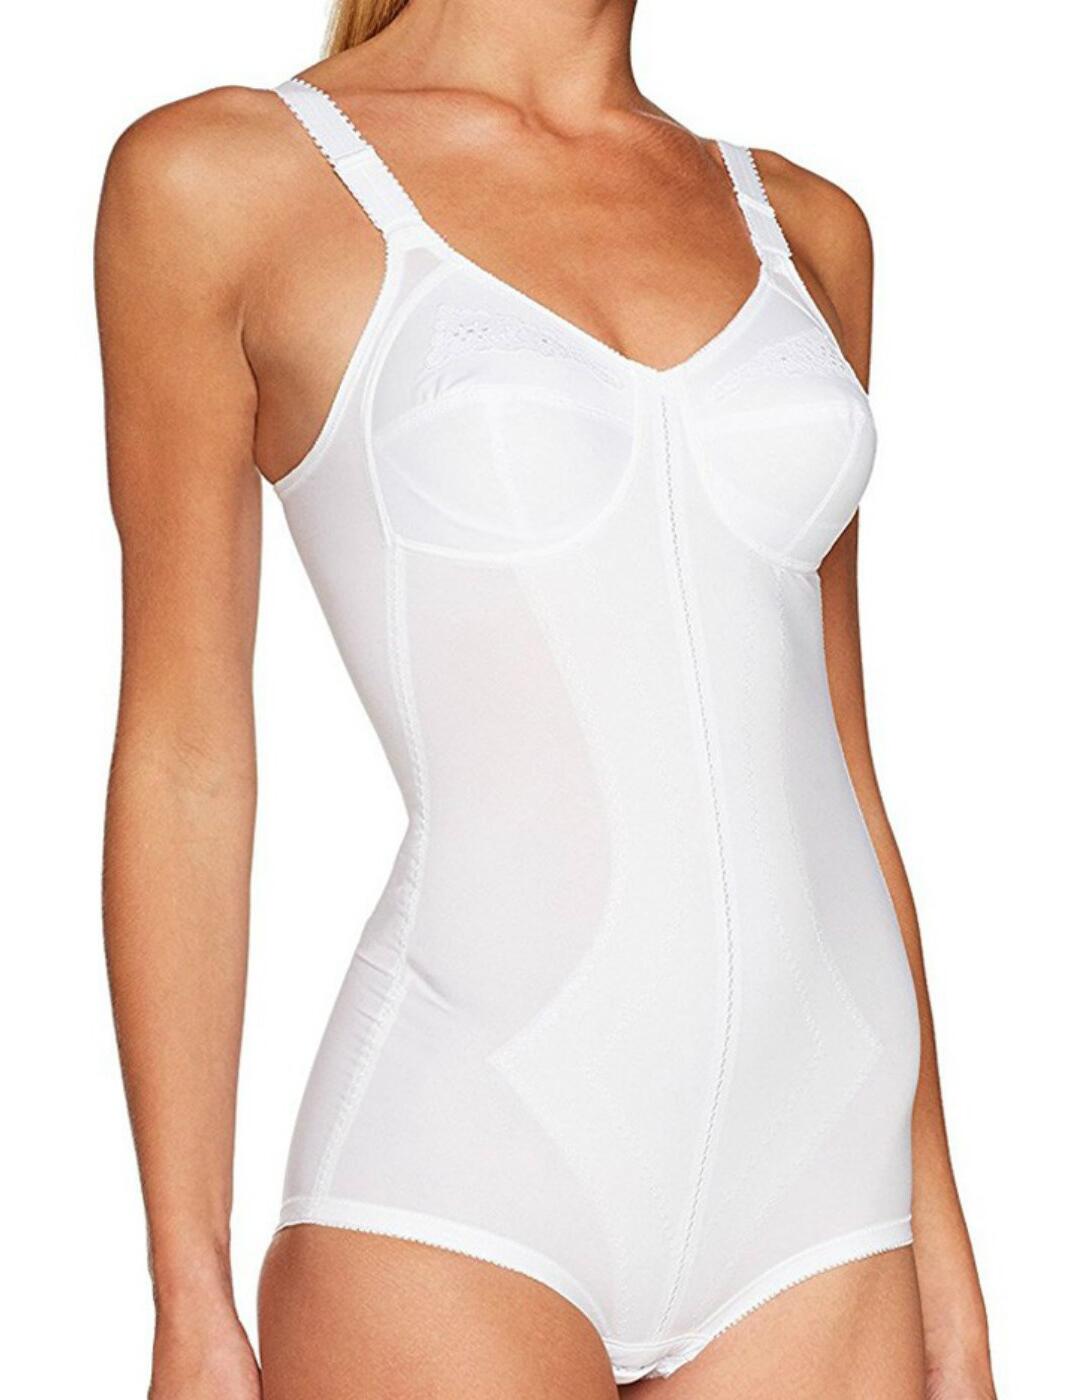 Playtex I Can't Believe It's A Girdle All In One Bodysuit - Belle Lingerie